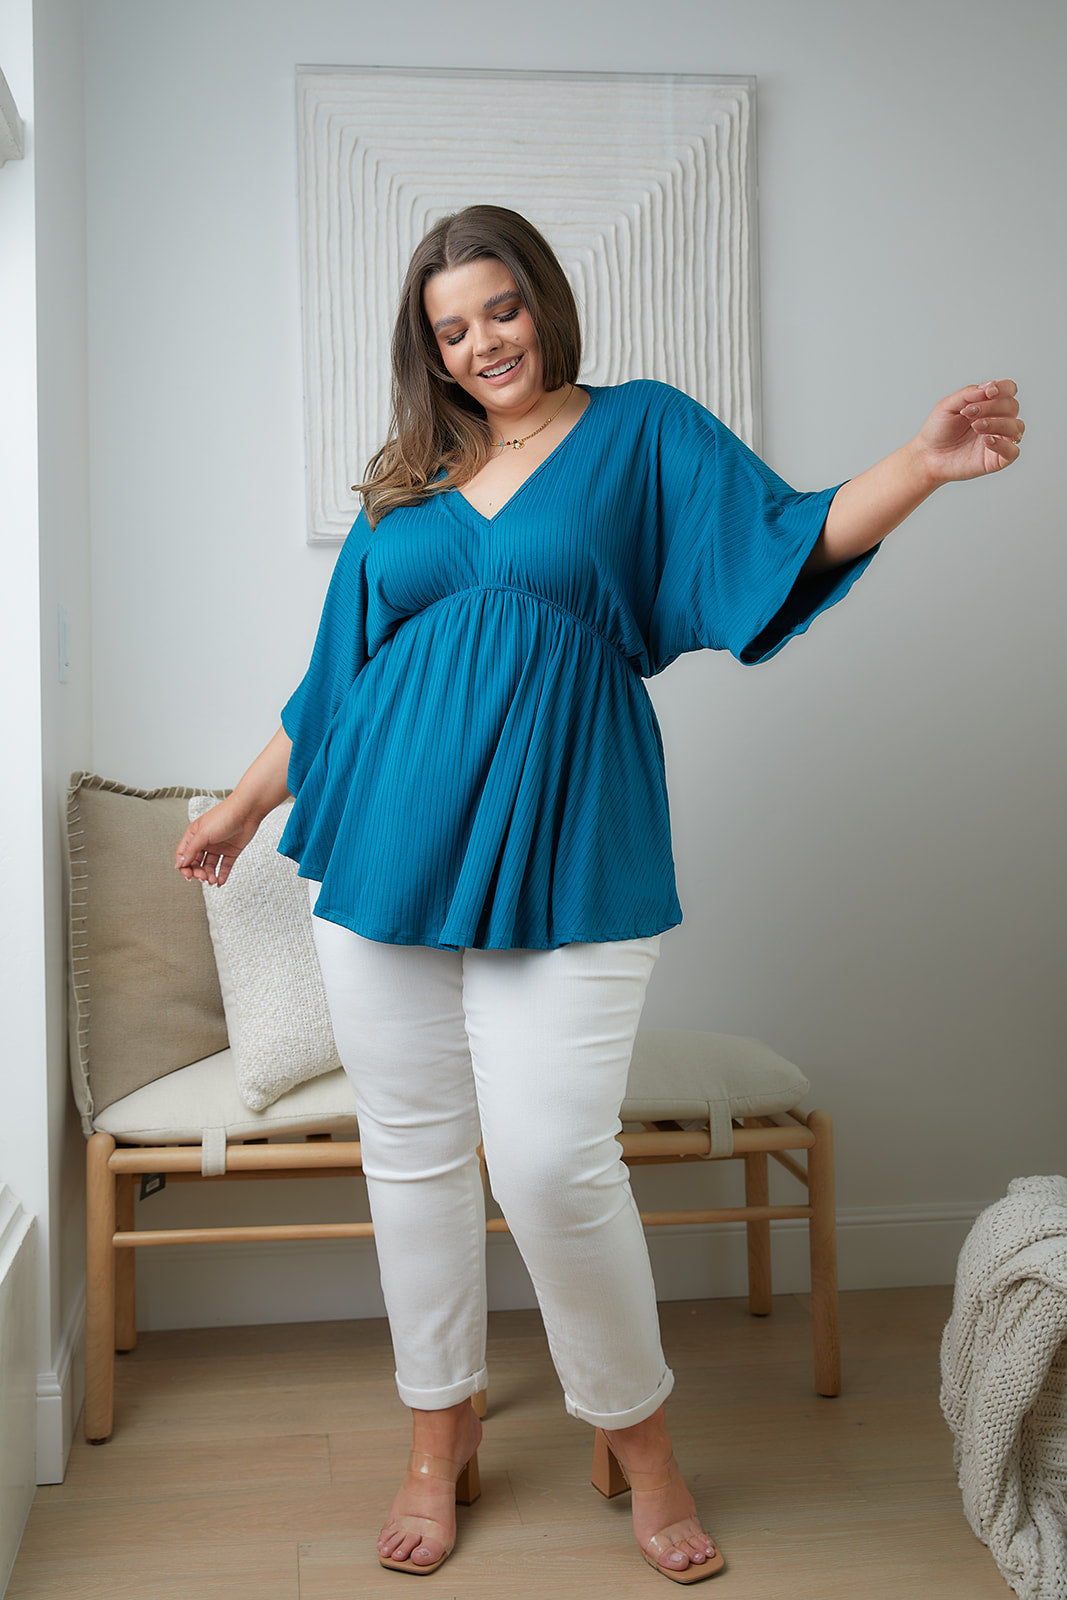 Day Date Teal Peplum Top, SMALL & MED left!